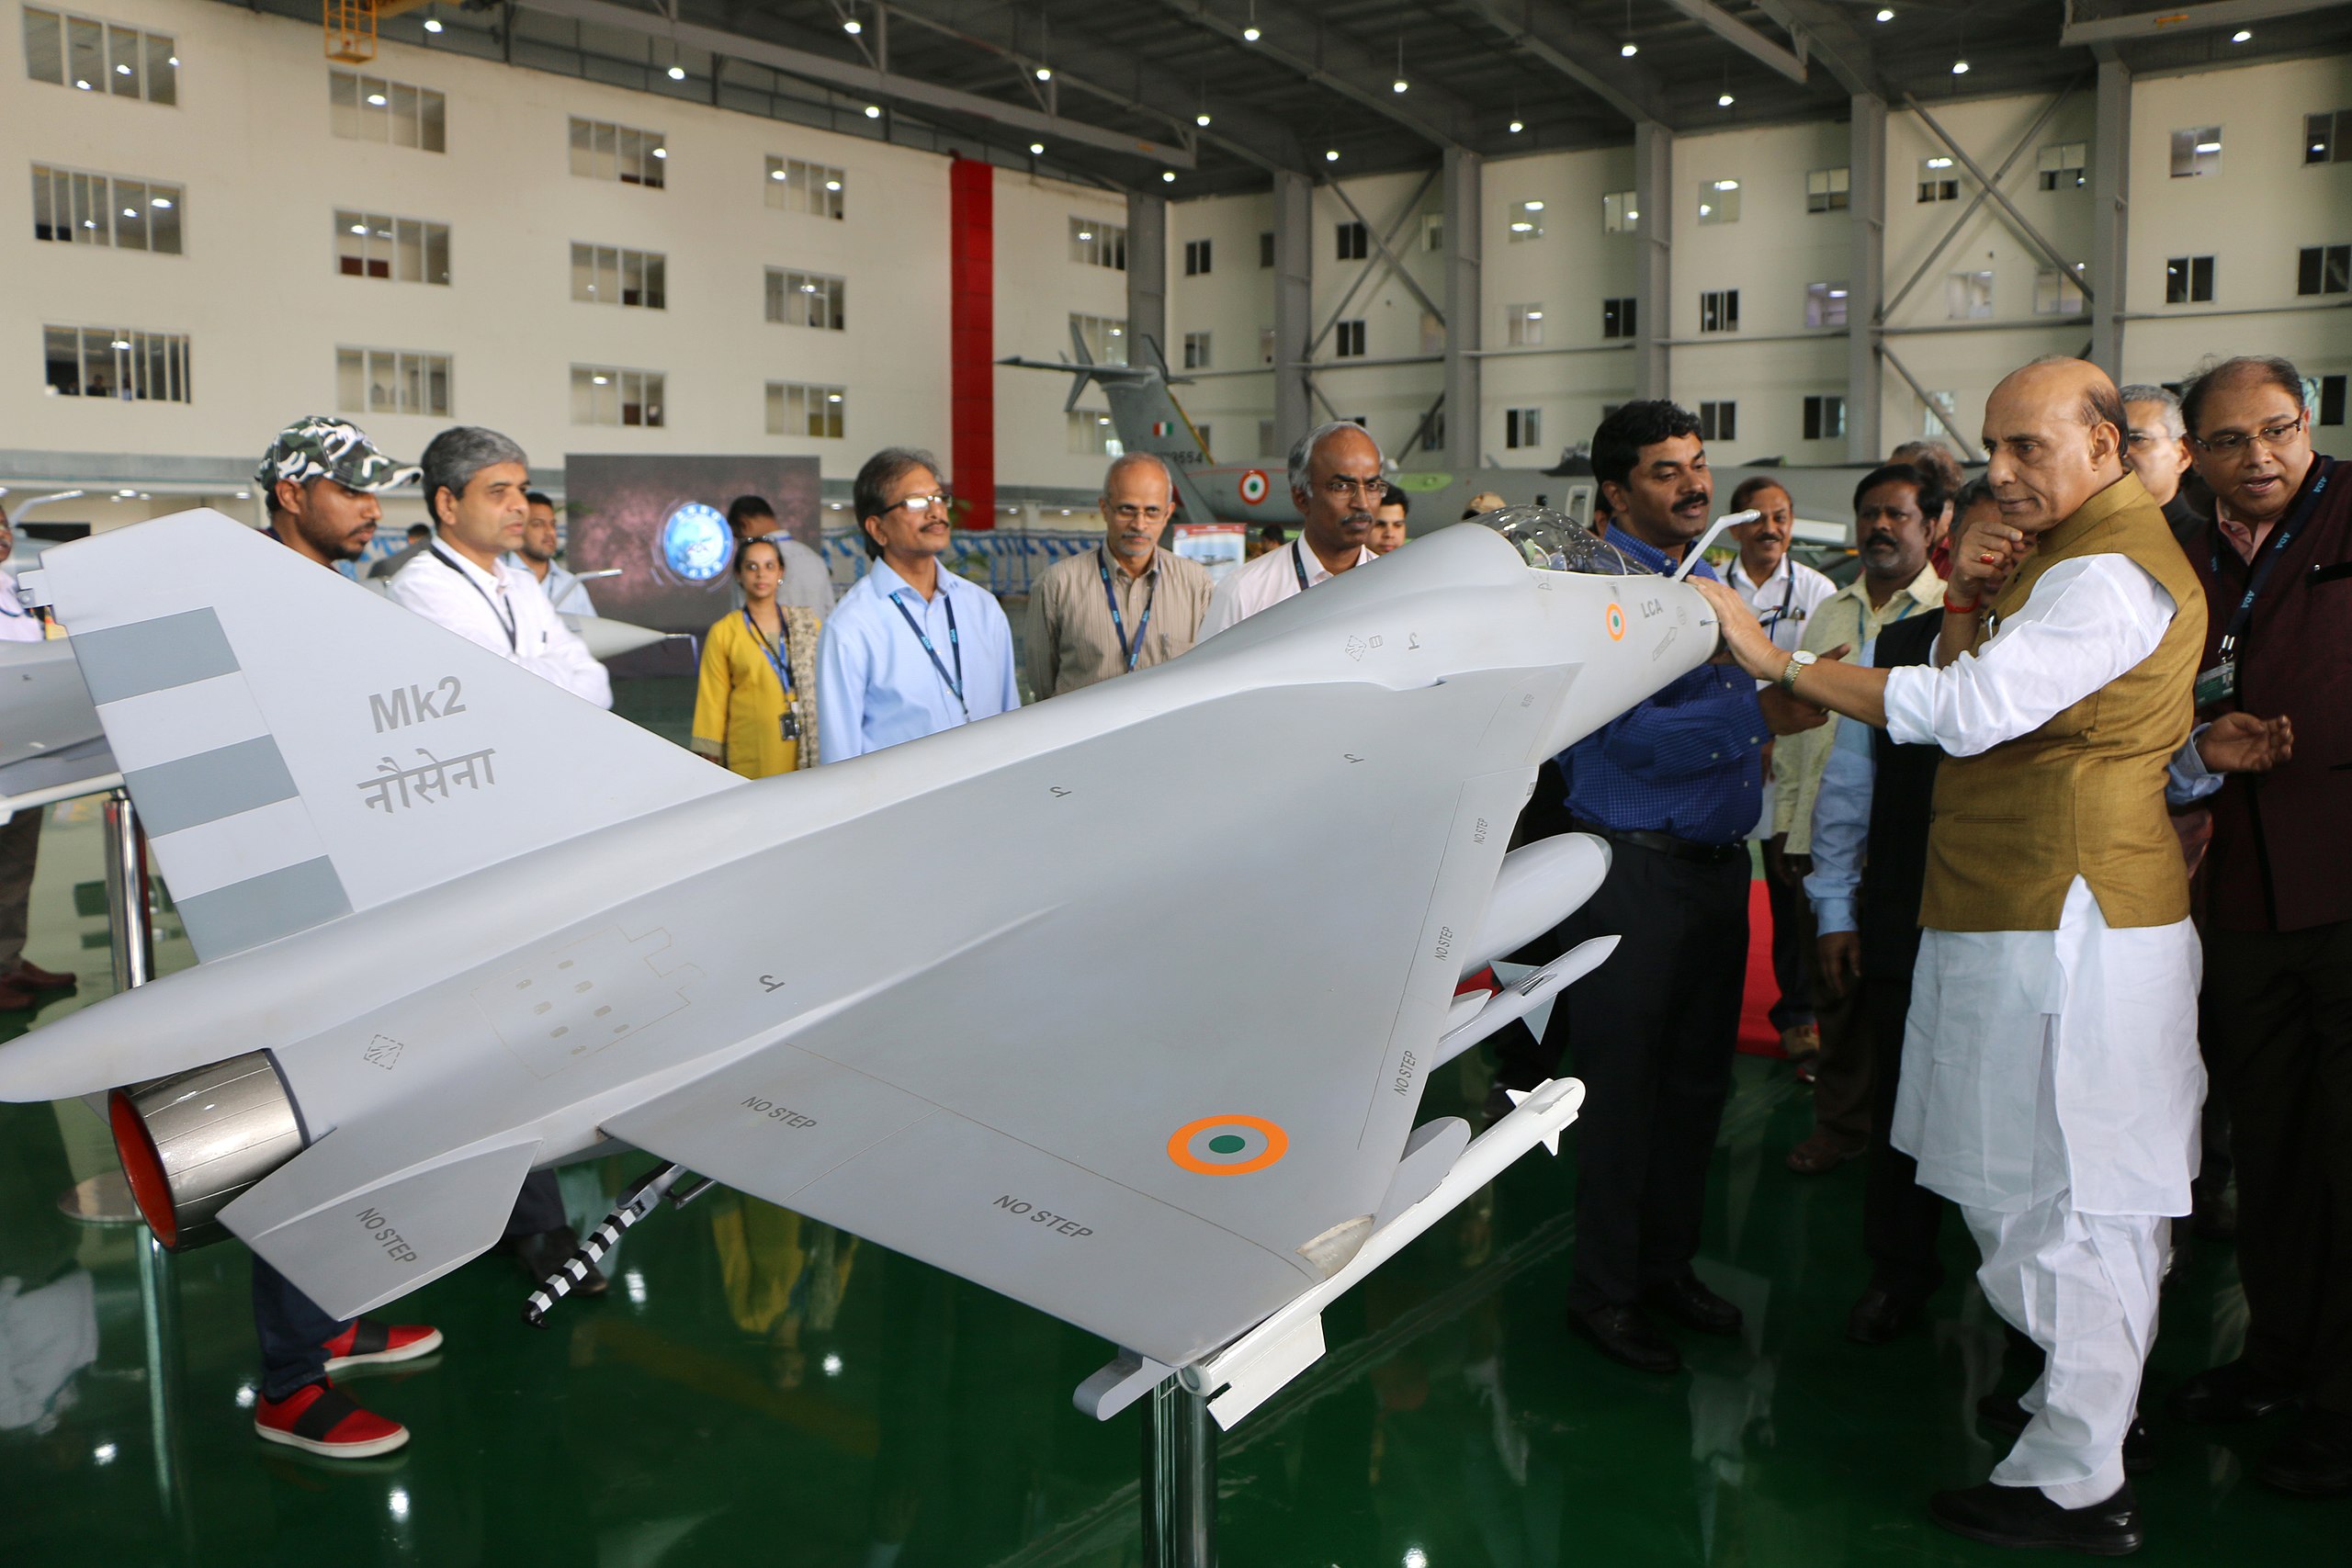 2560px-A_model_of_Naval_Tejas_Mk2_during_an_exhibition_by_DRDO_%26_HAL_on_September_19%2C_2019.jpg